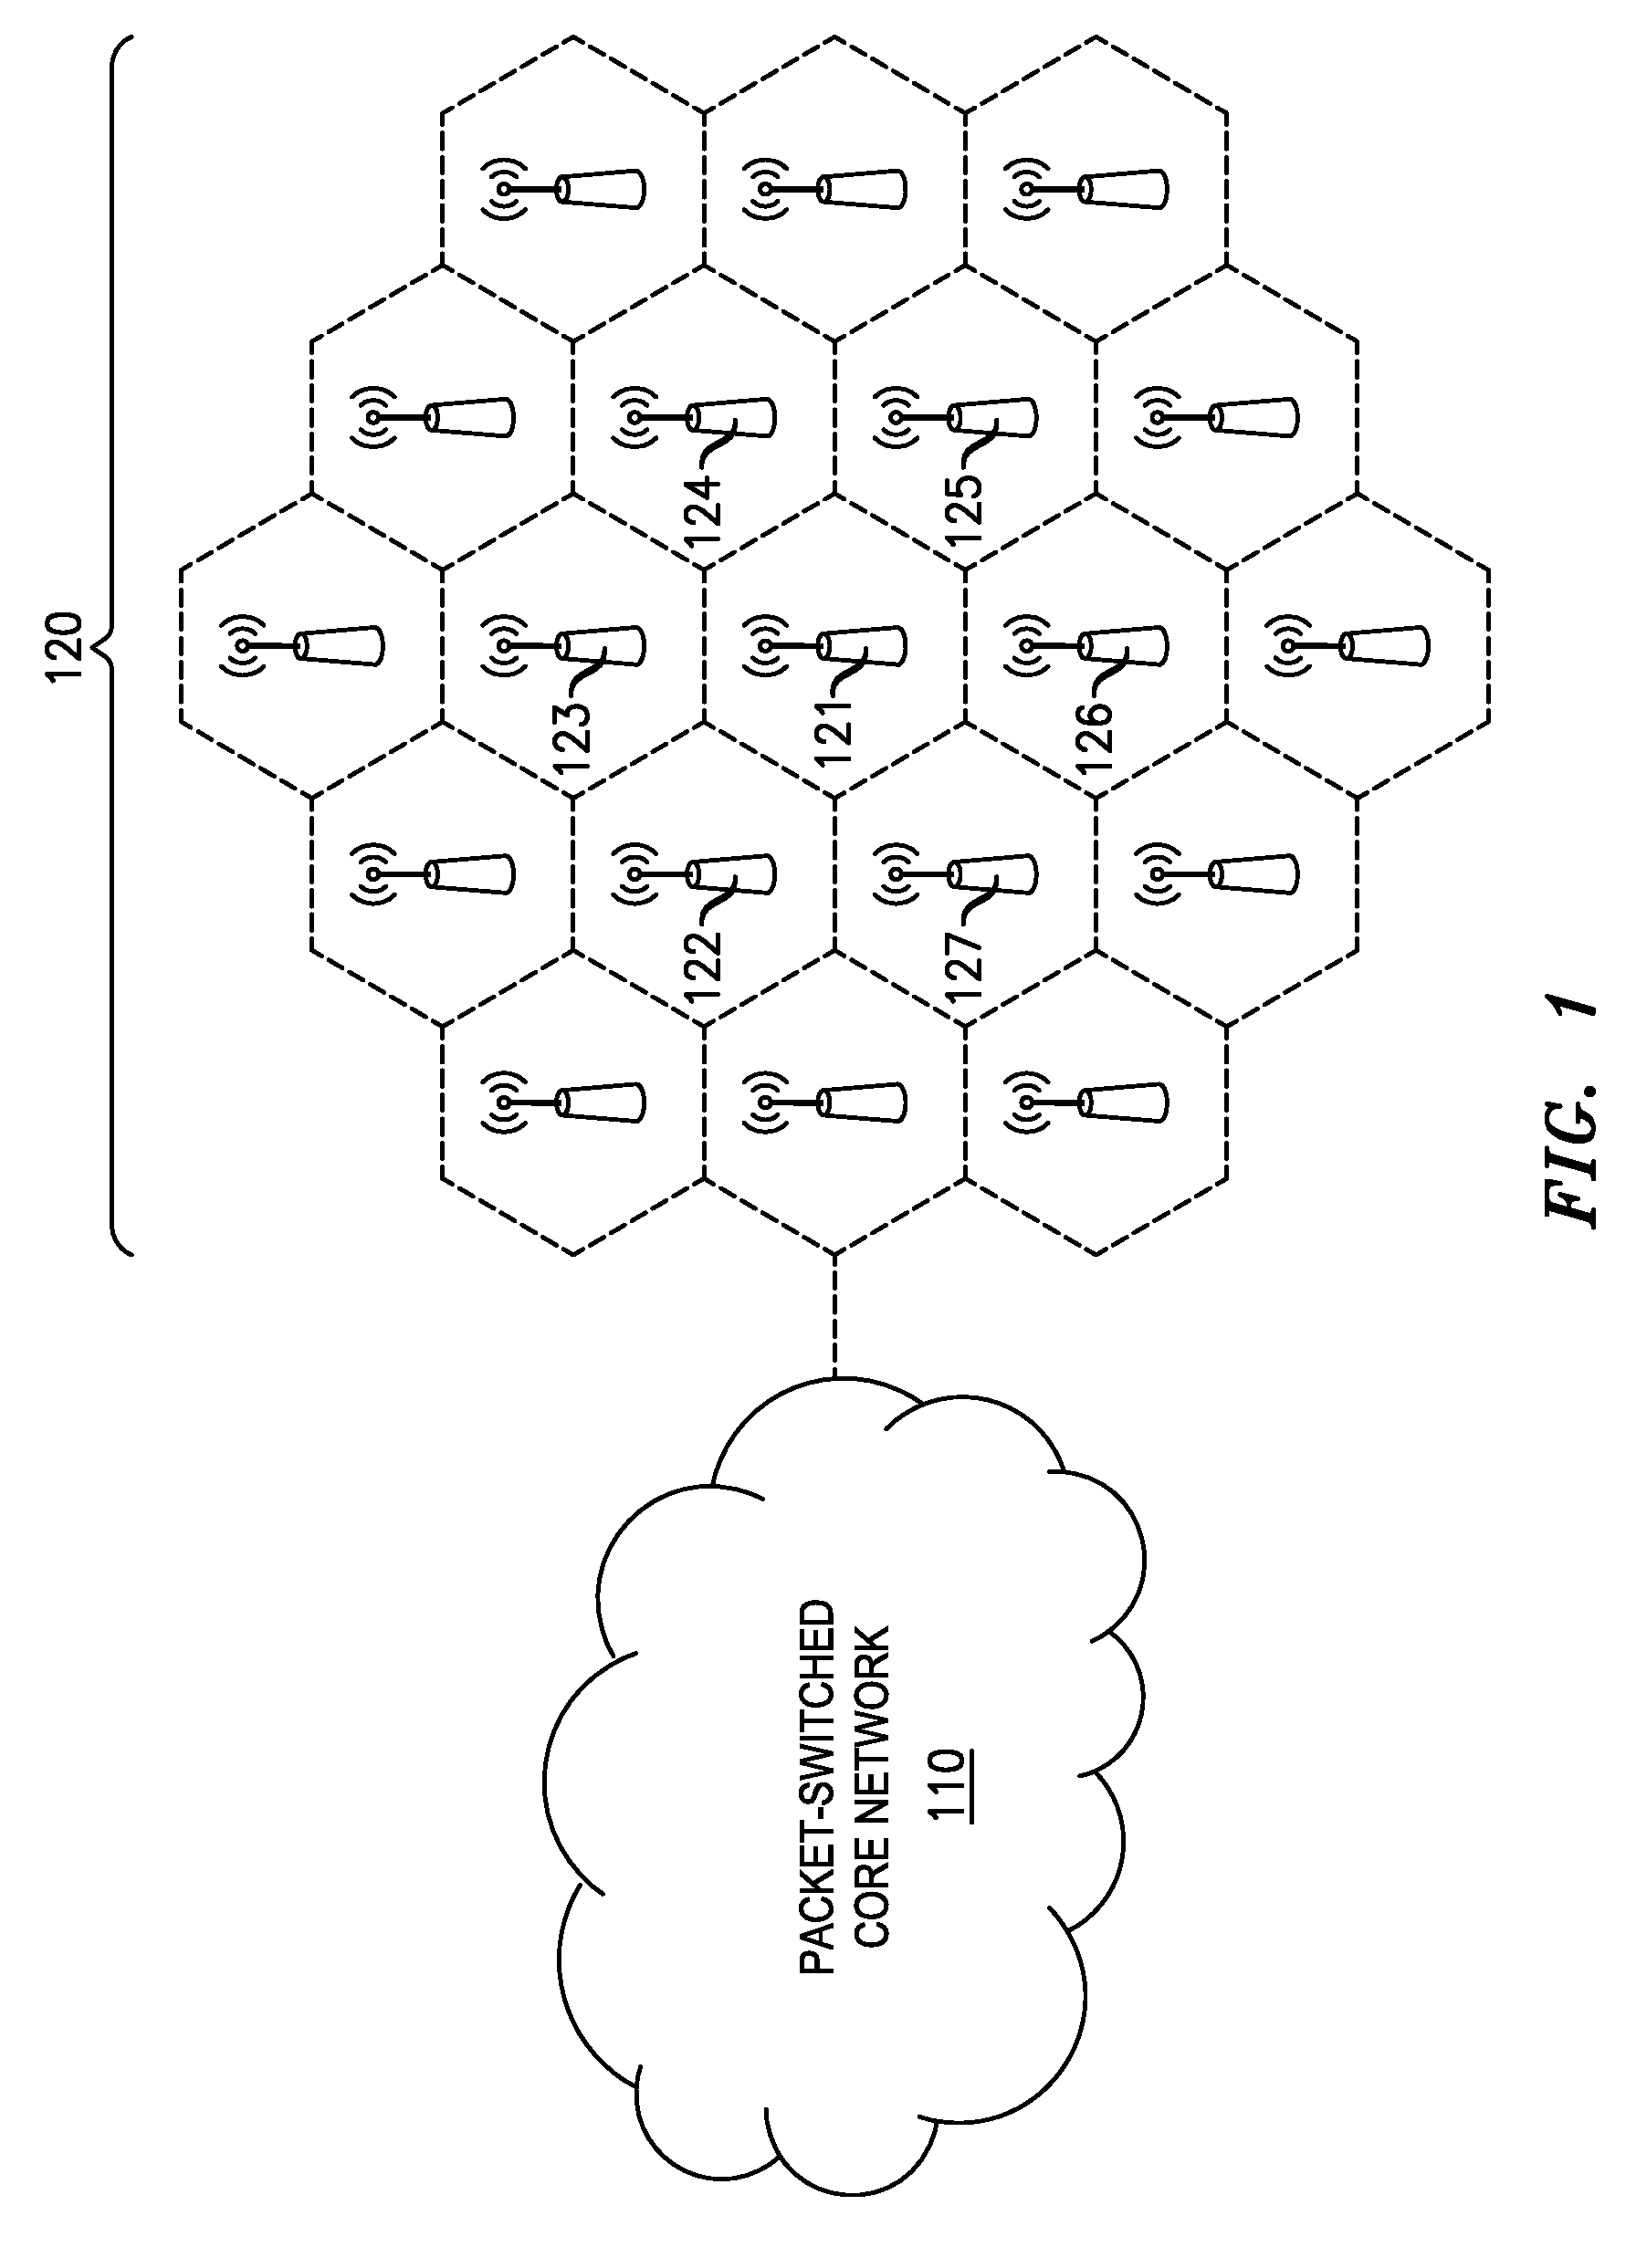 Method And Apparatus For Improved Management Of Service-Impacting Events